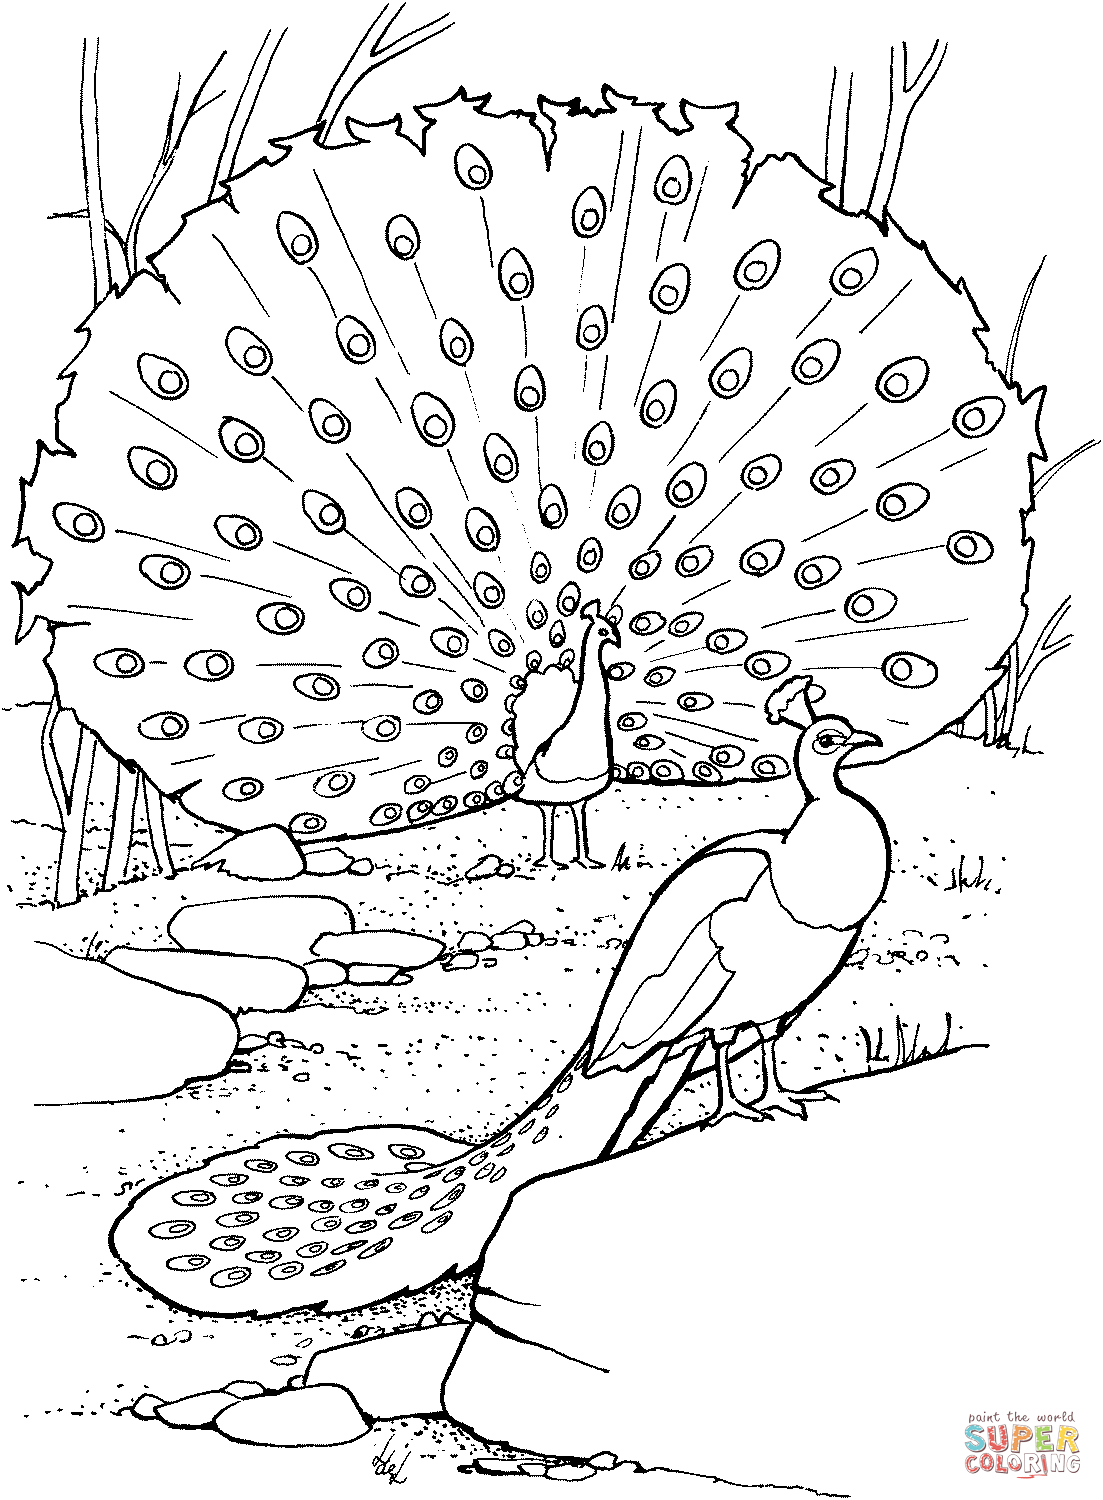 peacock colouring picture peacock coloring pages to download and print for free picture peacock colouring 